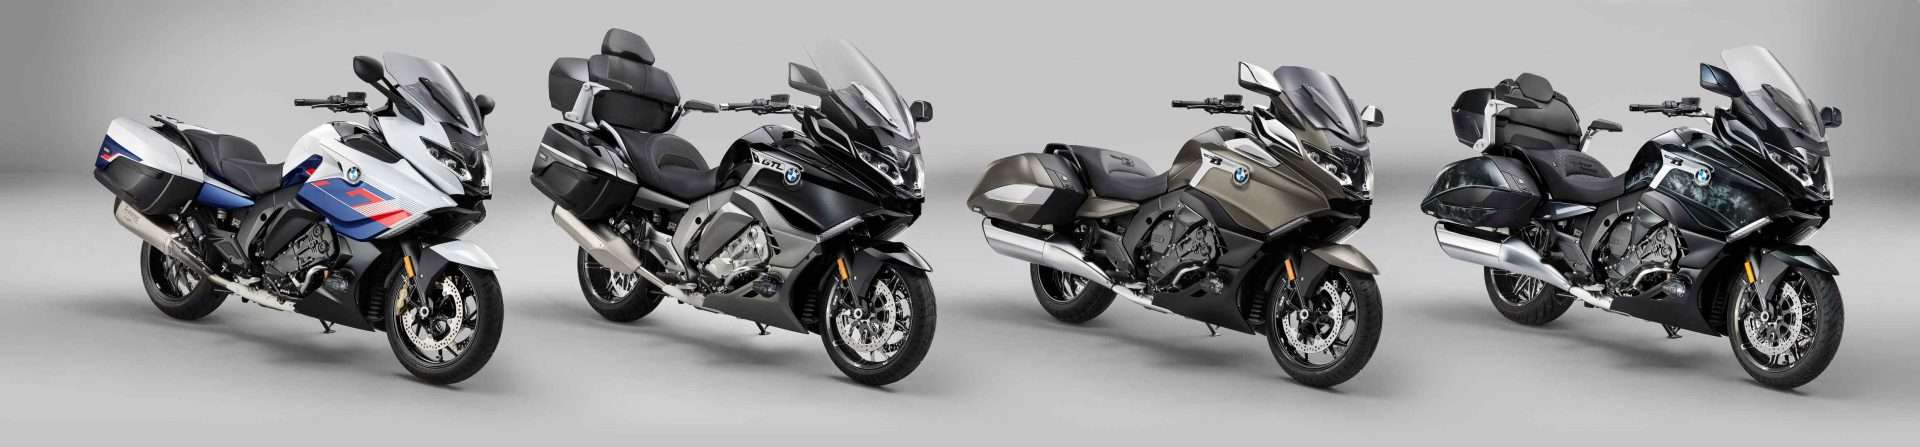 2022-bmw-k-1600-lineup-first-look-touring-motorcycles-1-1920x447